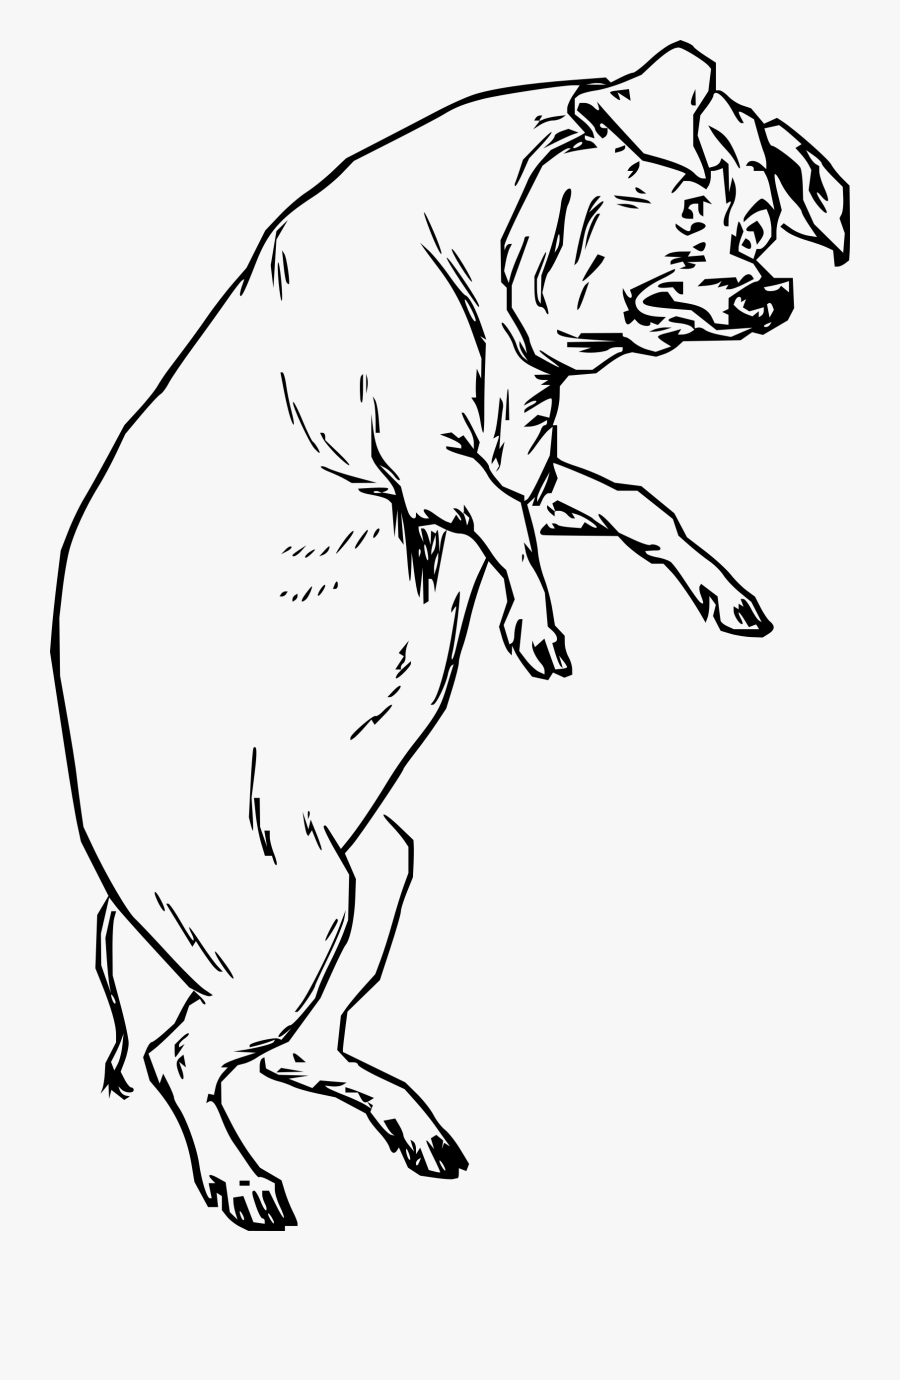 The Pig Who Had None - Pig On 2 Legs, Transparent Clipart